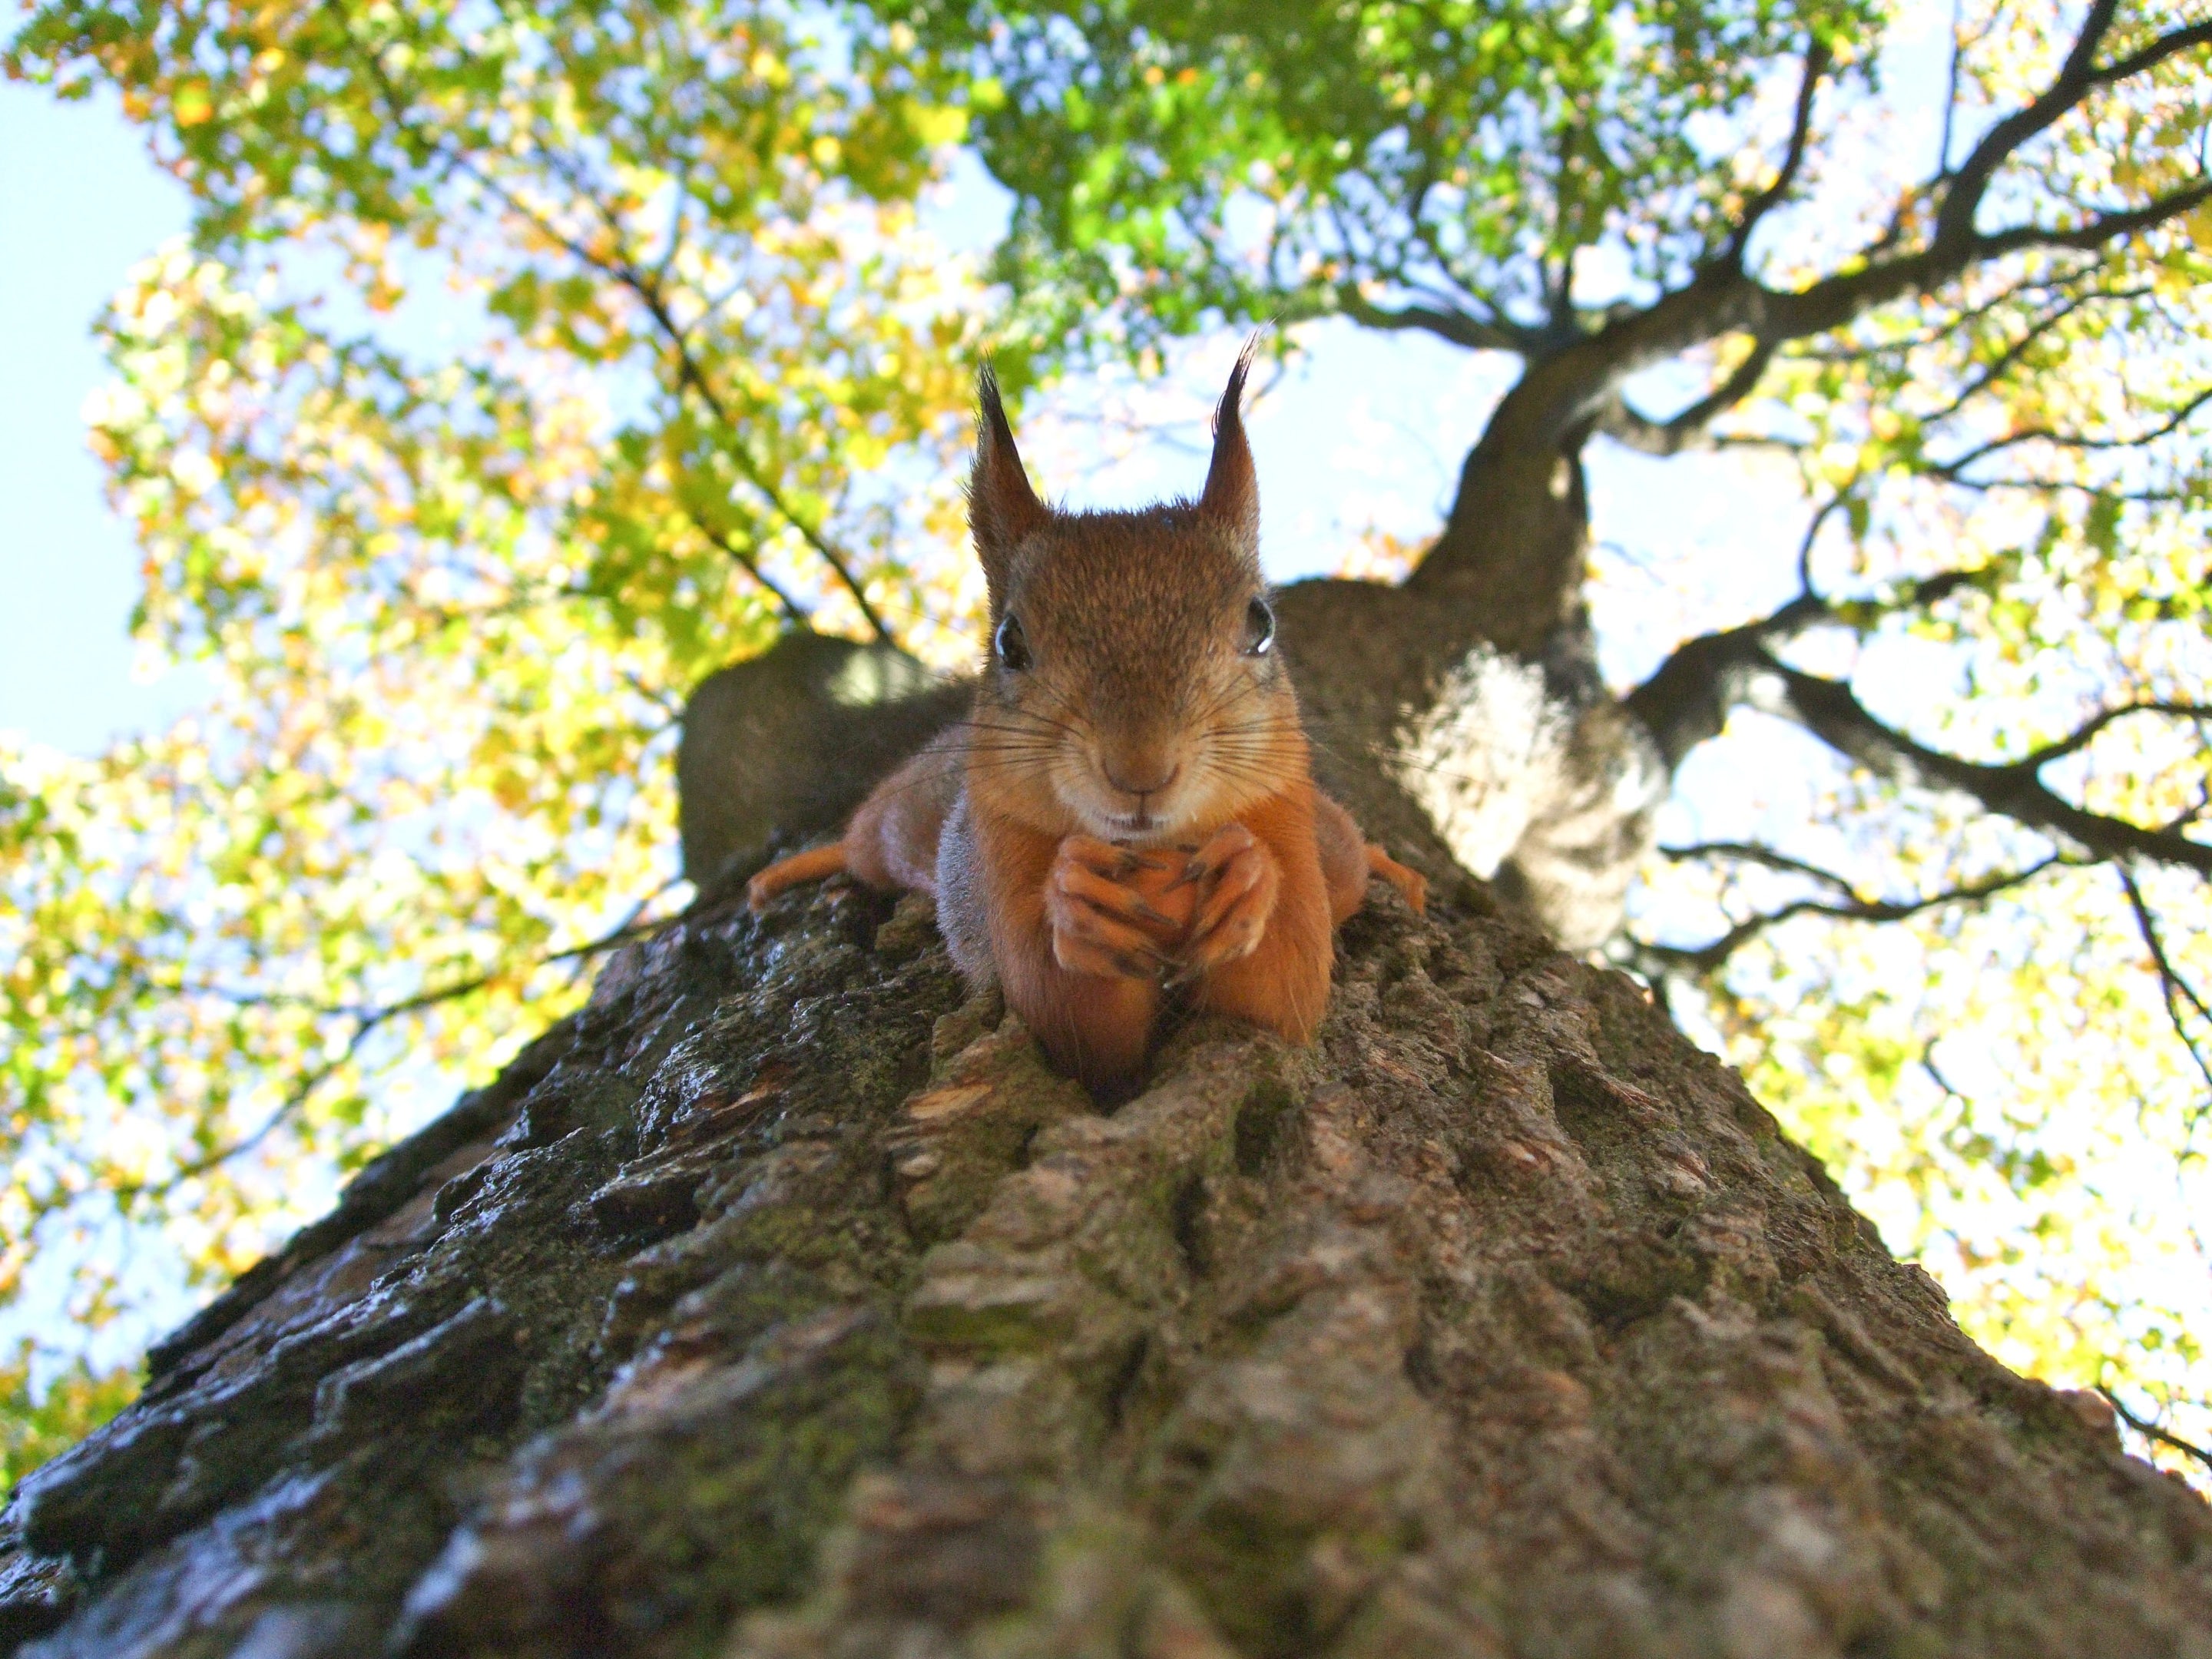 Squirrel in a tree looking down and holding a nut.